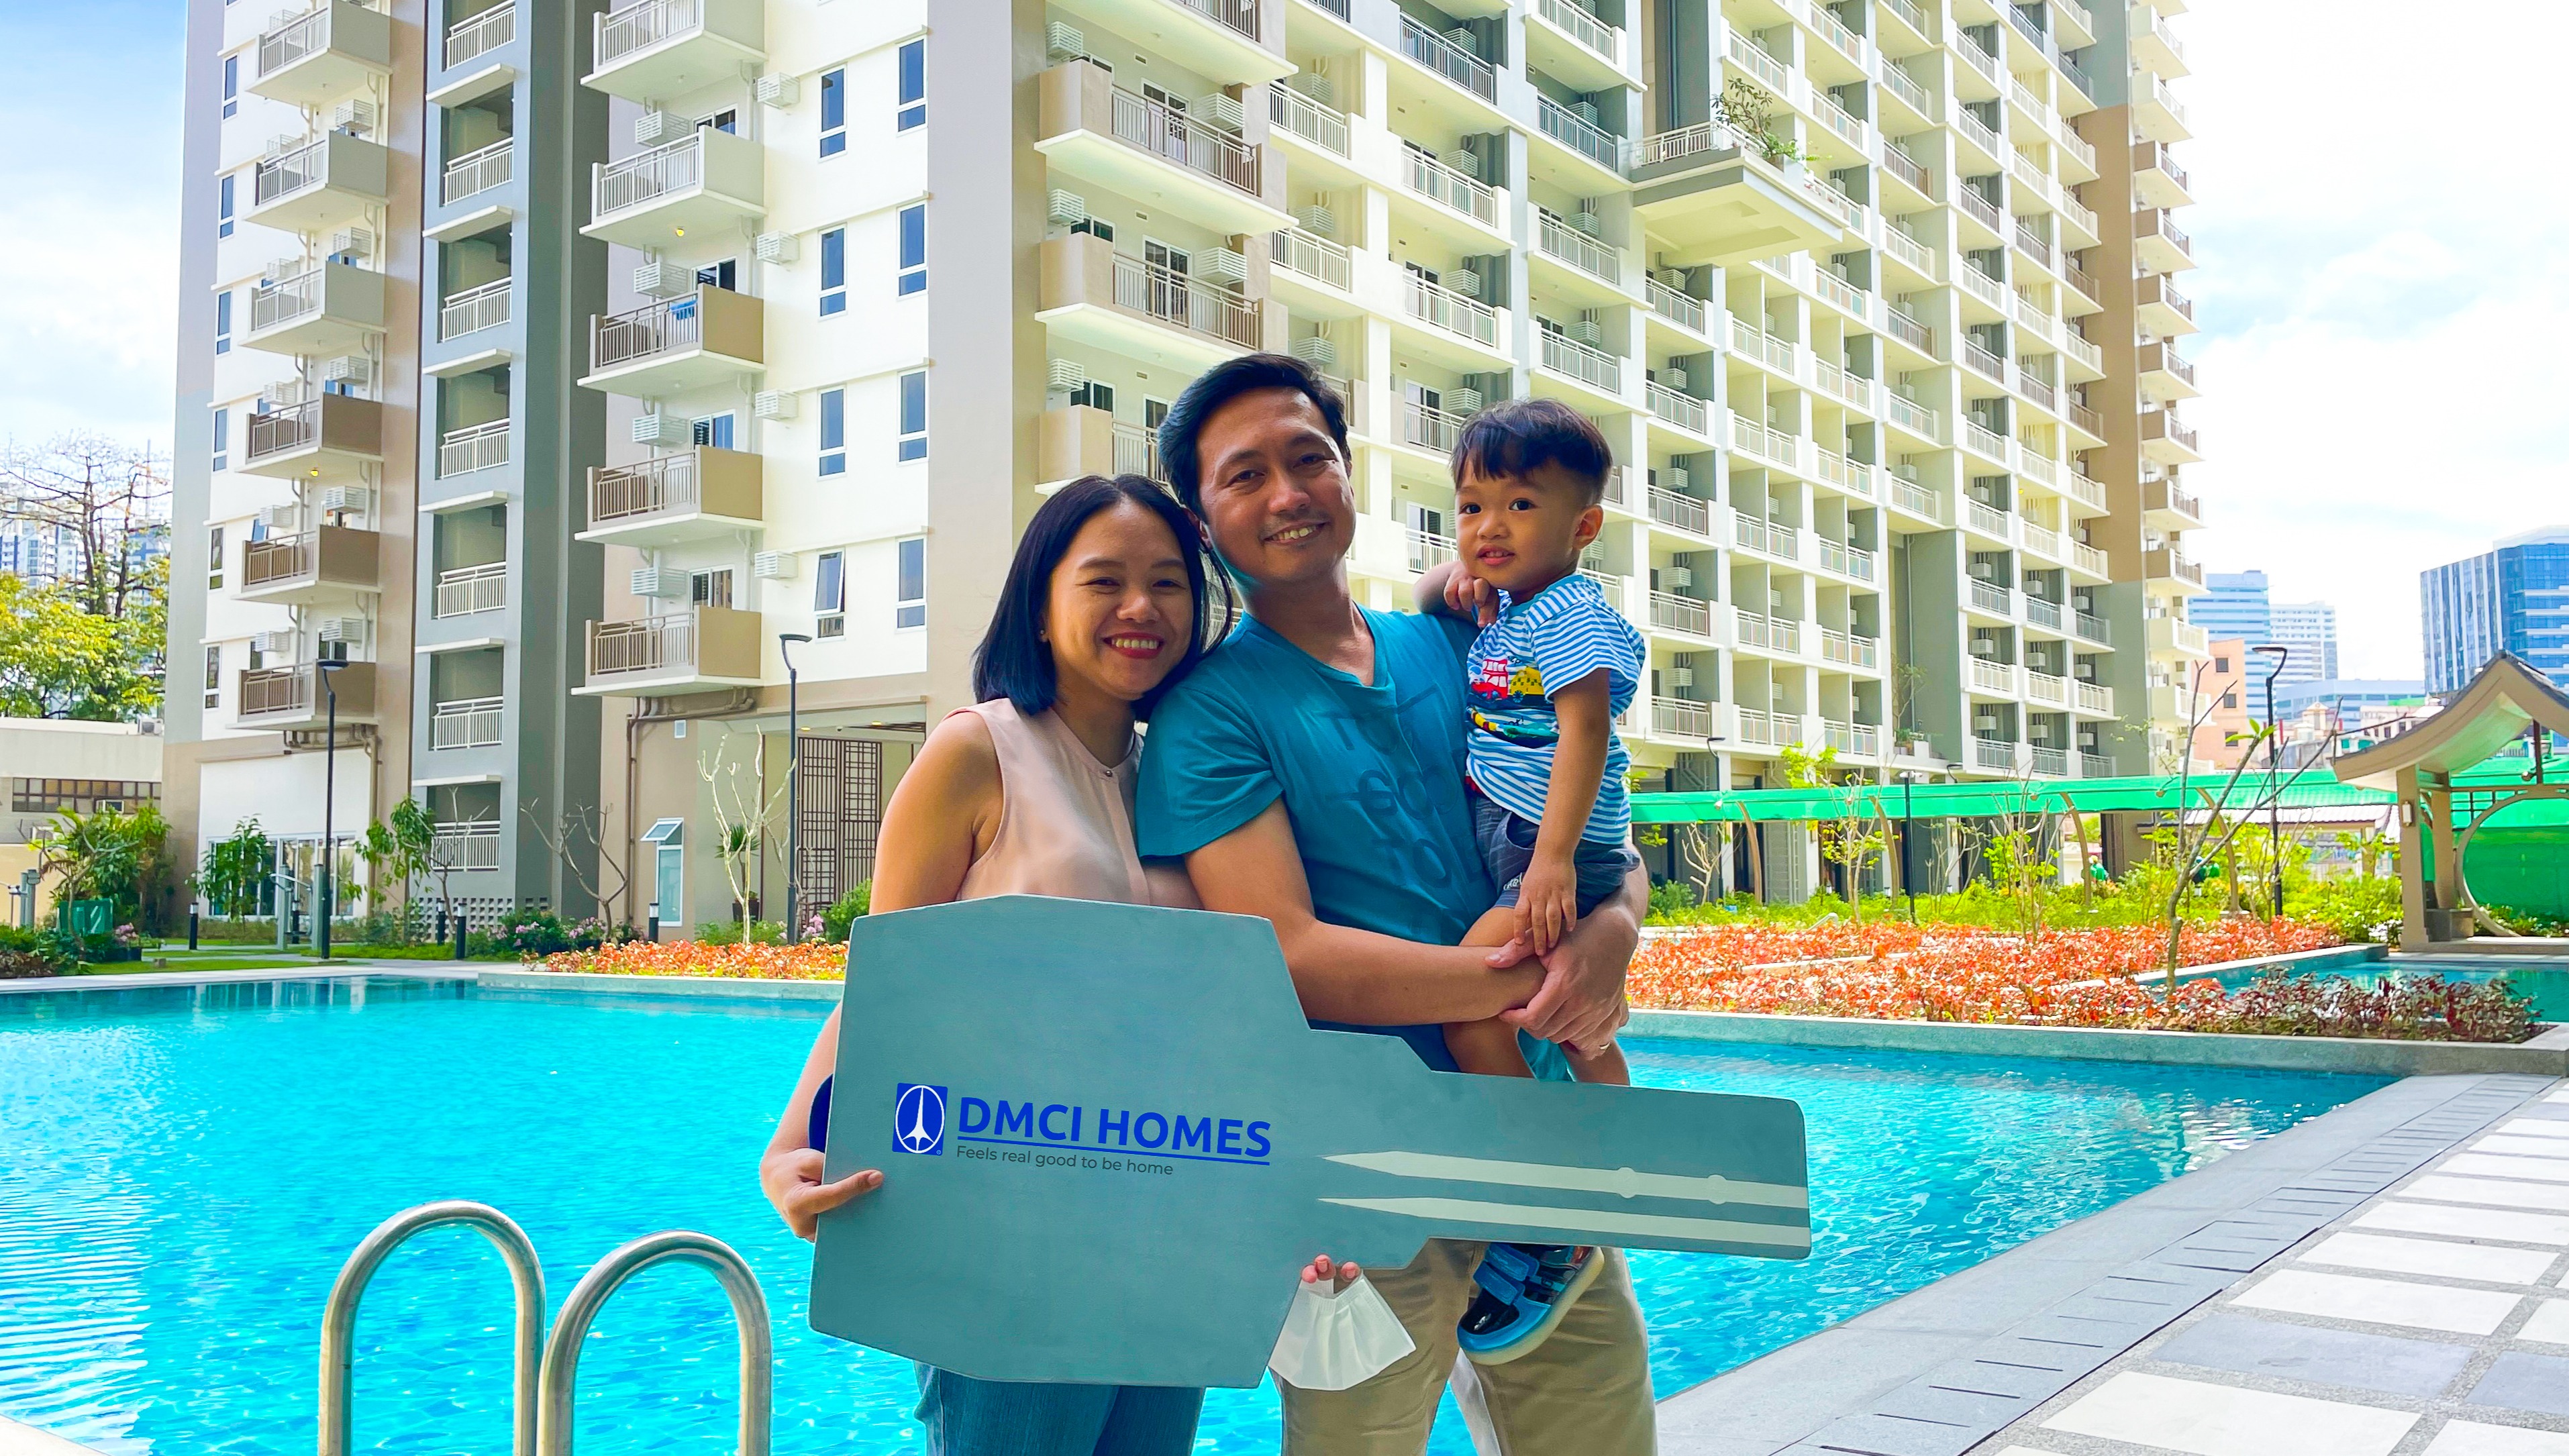 dmci-homes-first-japanese-architecture-inspired-condo-opened-to-residents-1675240122130